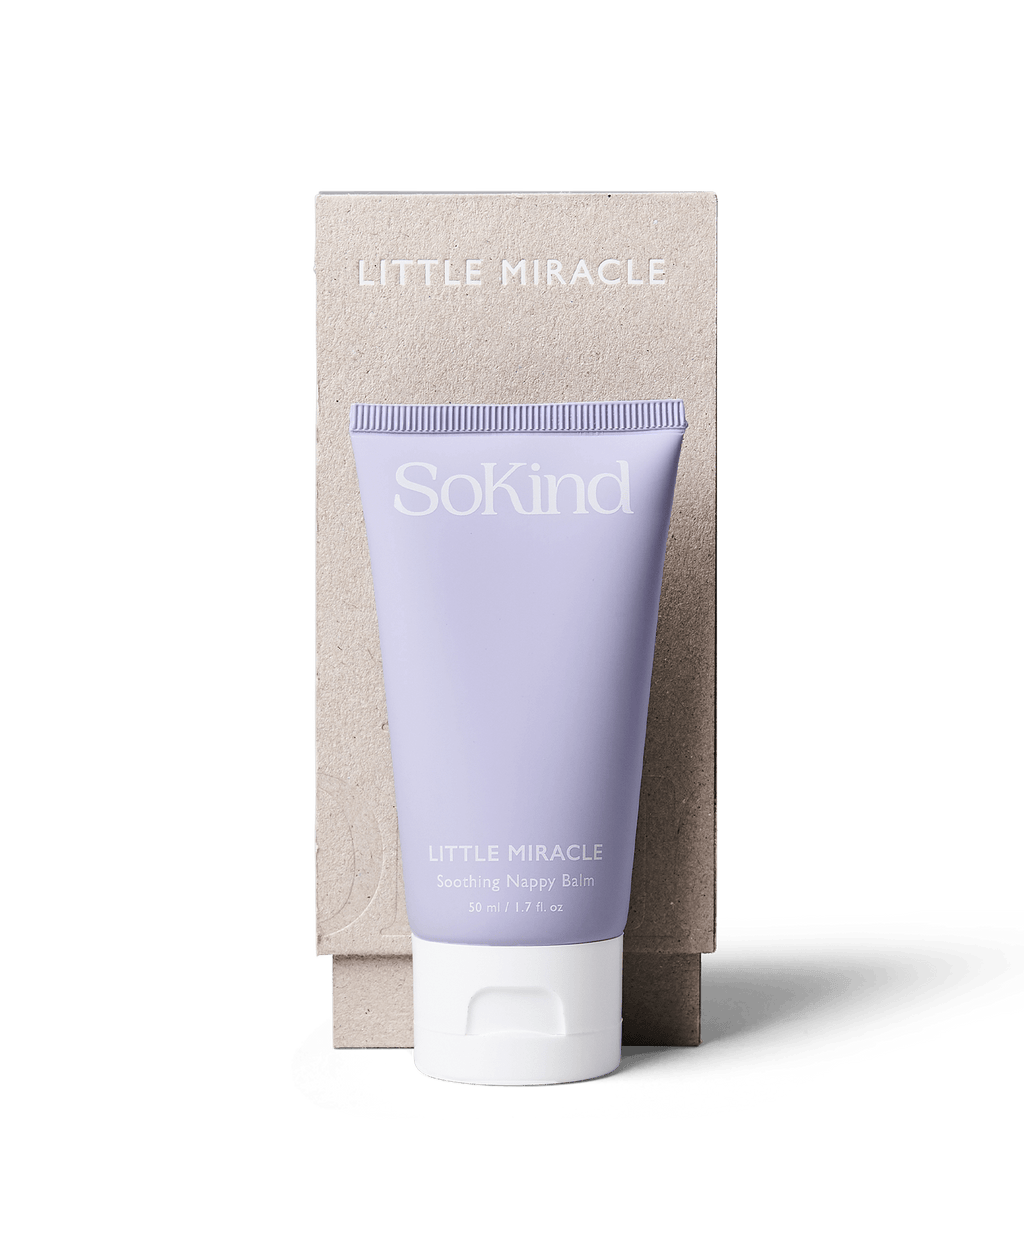 SO KIND - Little miracle (Soothing Nappy balm) - The Natural Beauty Club